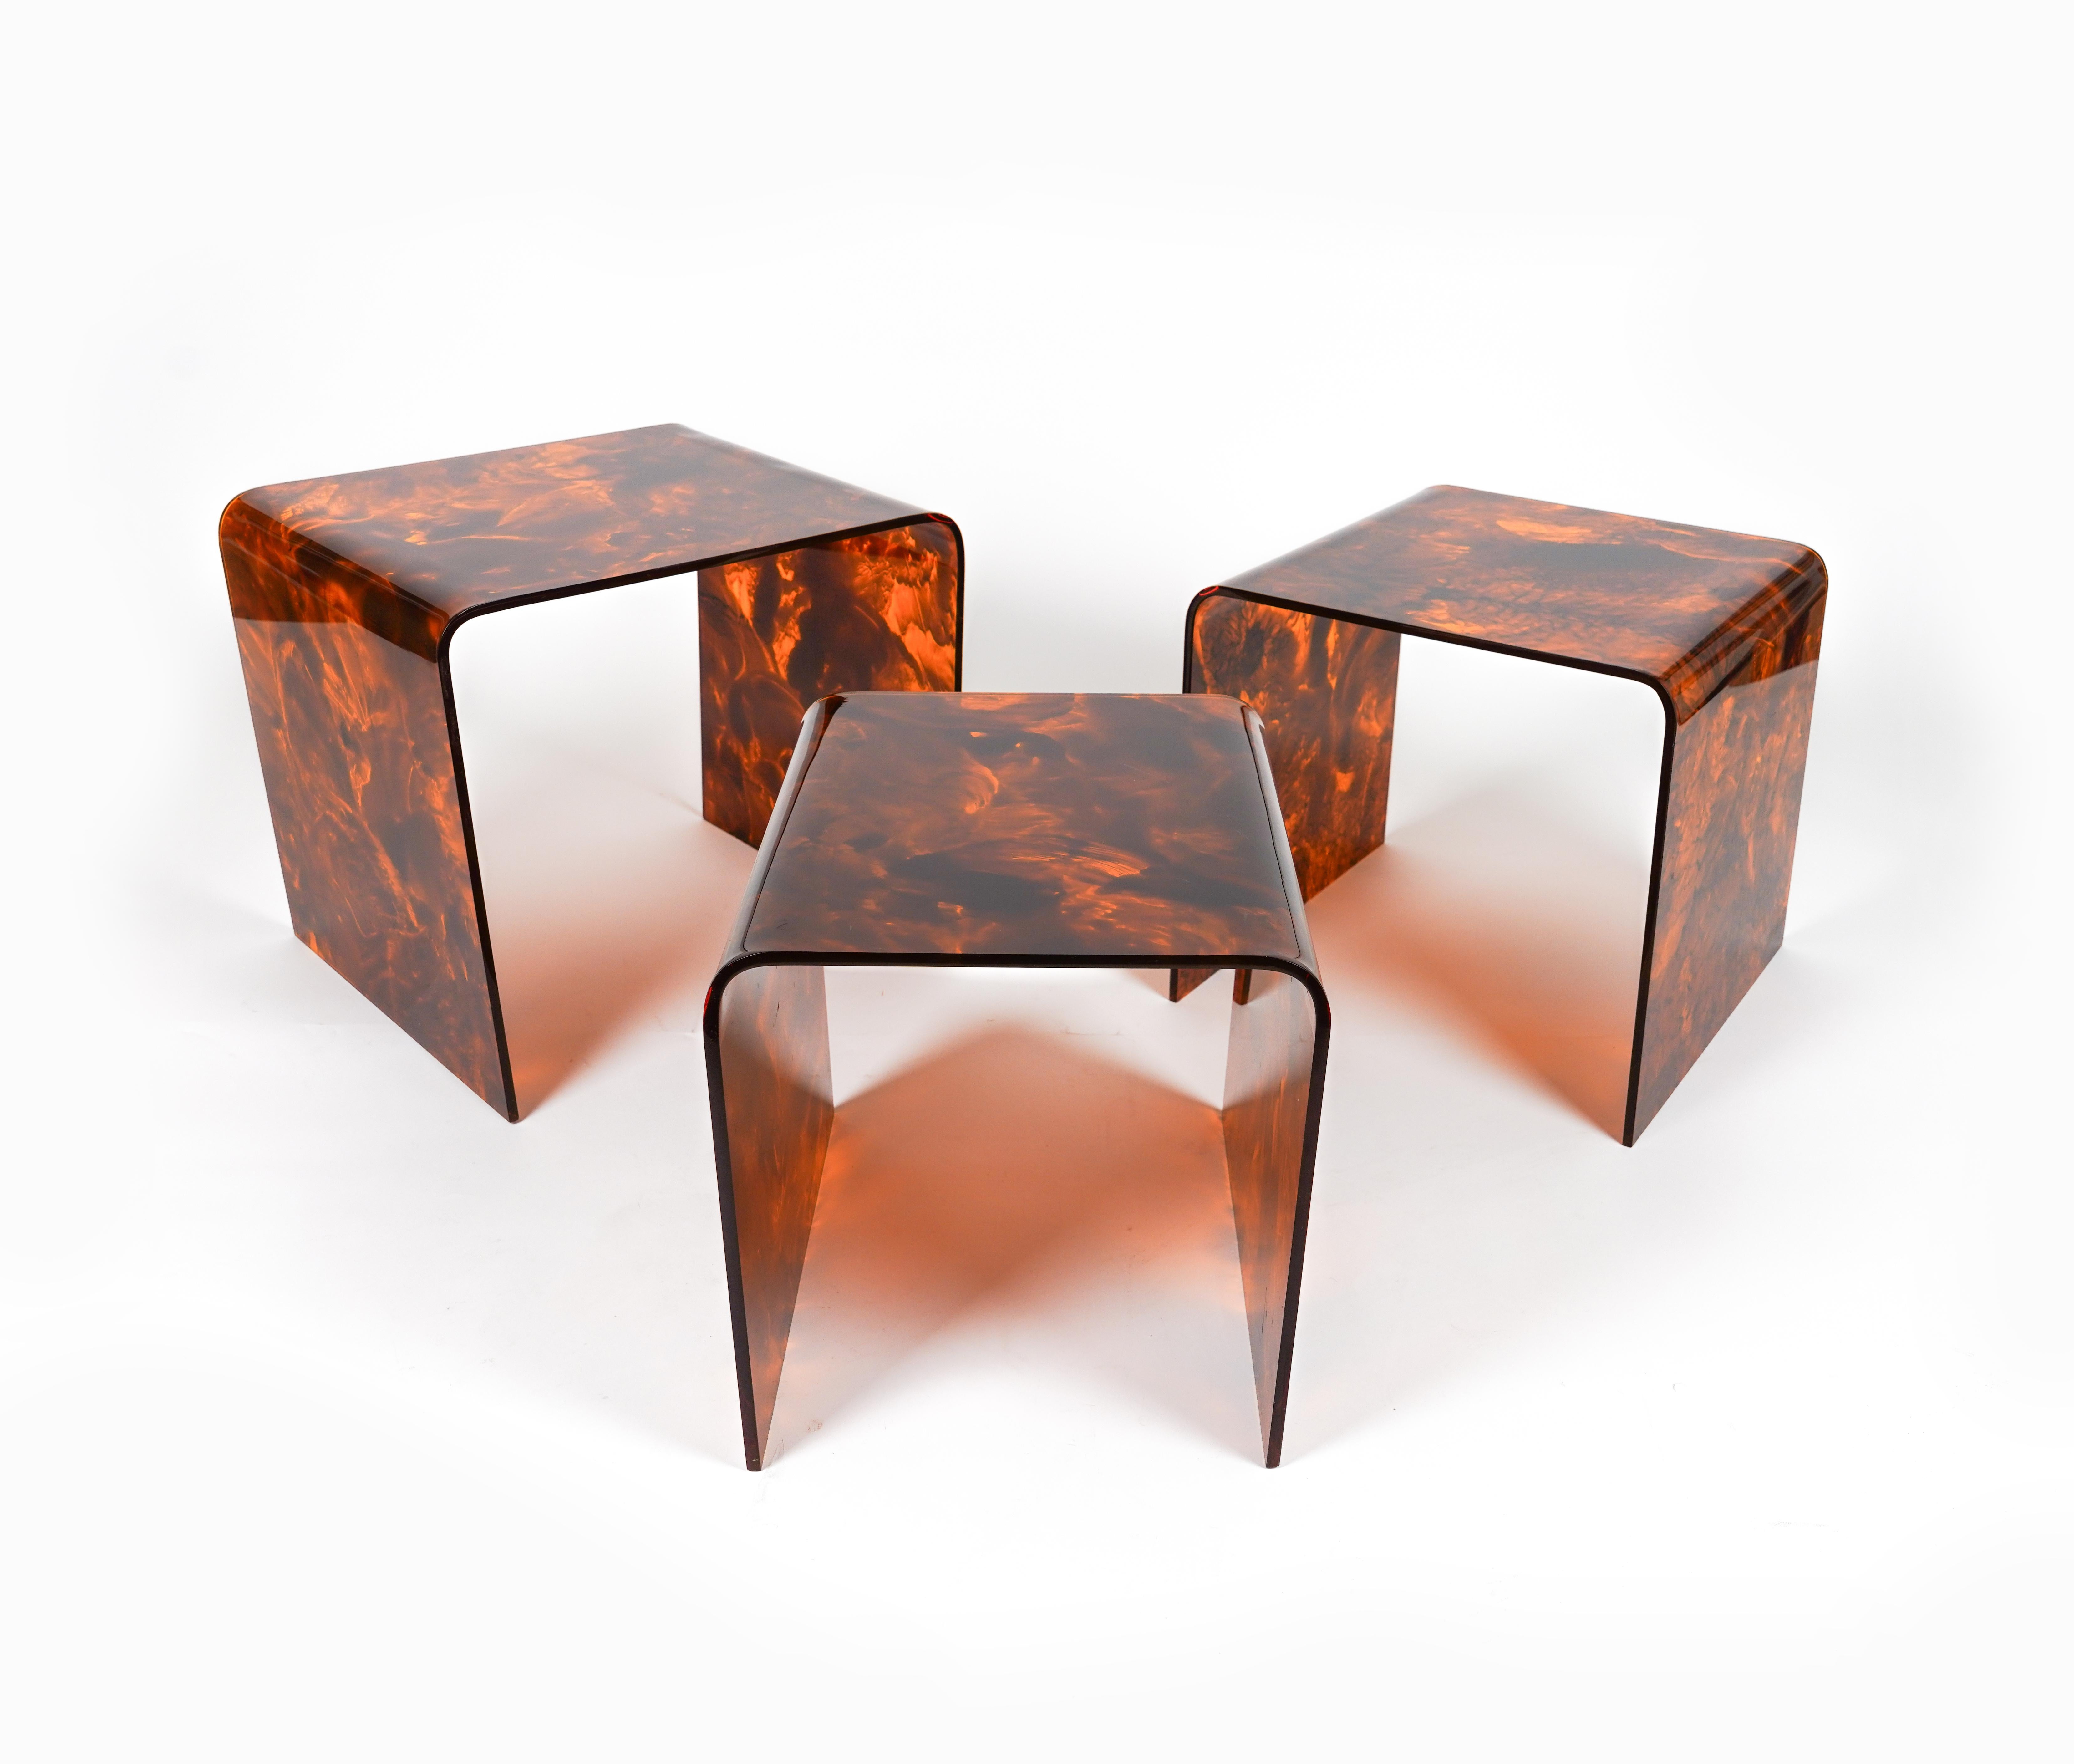 Set of 3 Nesting Tables in Lucite Faux Tortoiseshell Christian Dior, Italy 1970s In Good Condition For Sale In Rome, IT